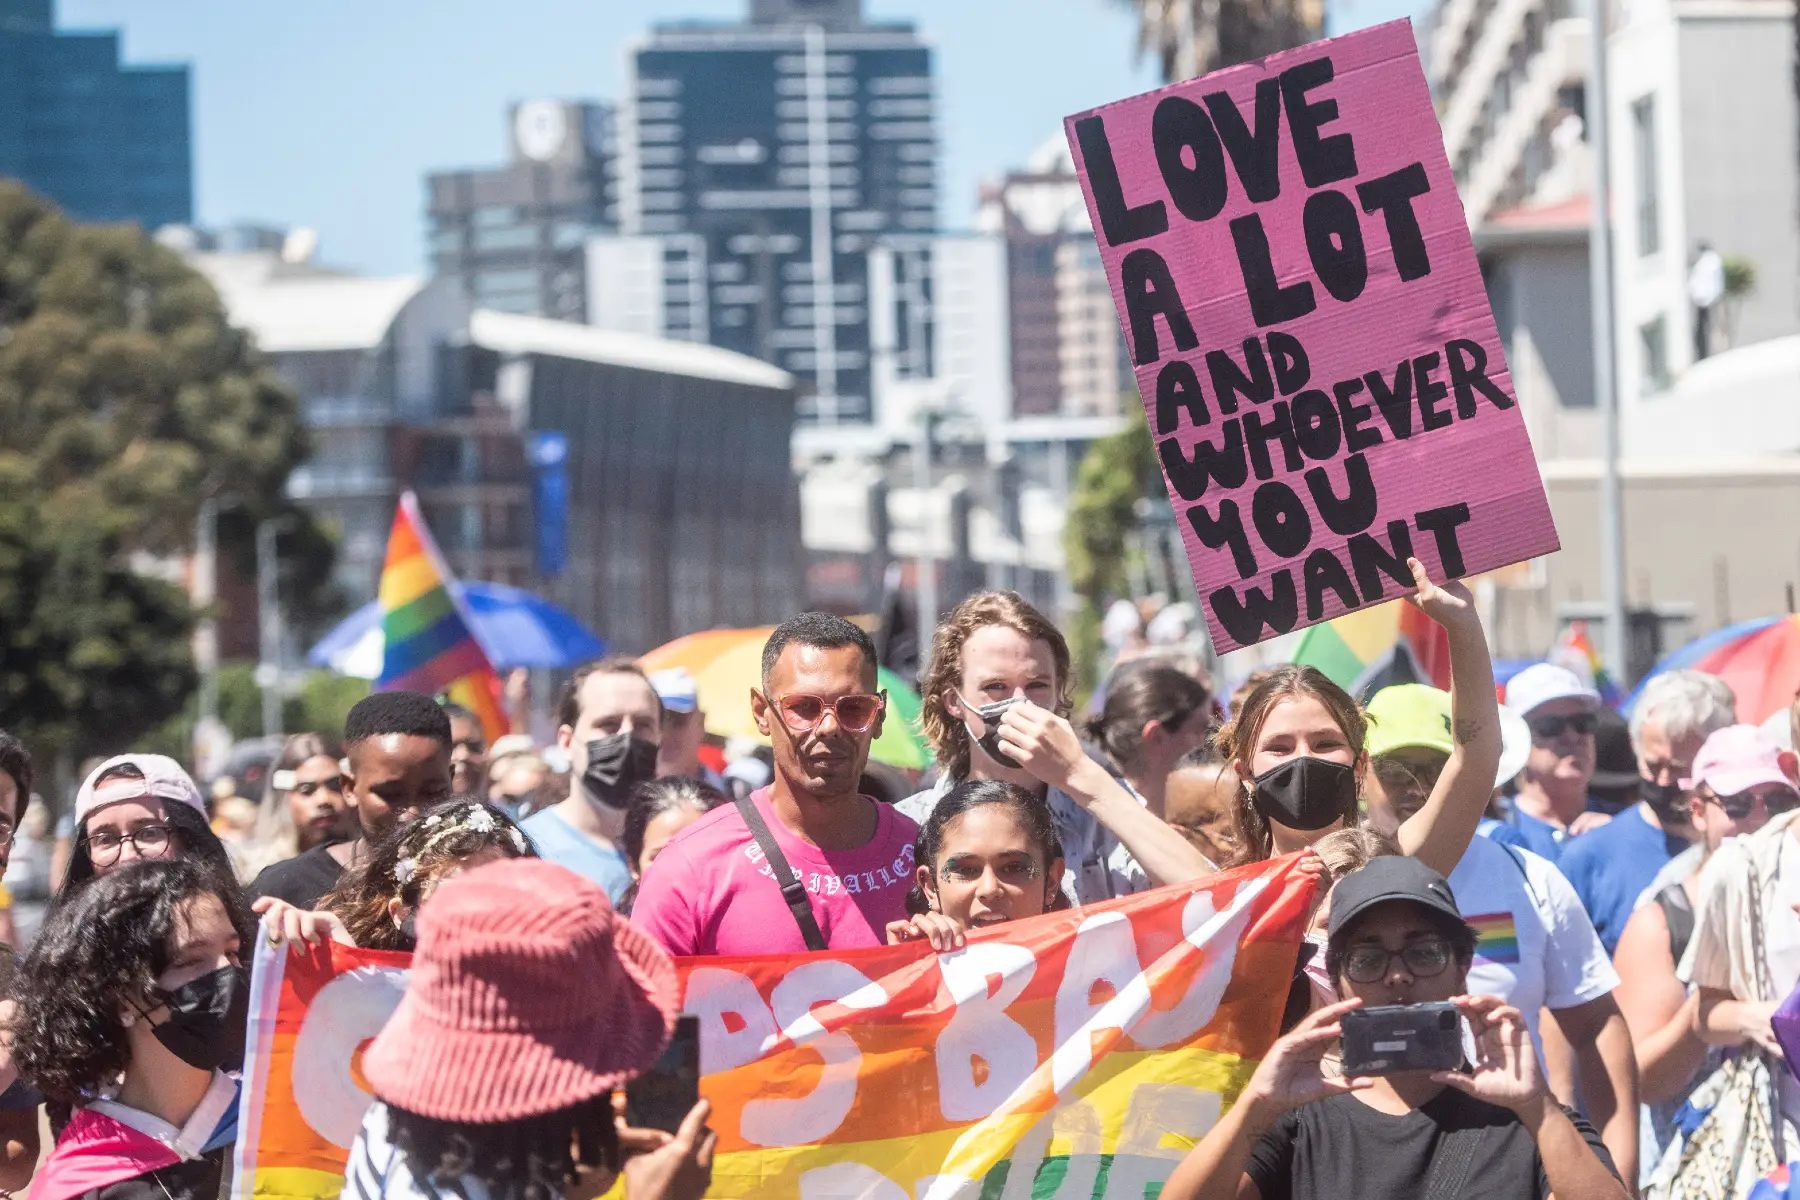 People marching behind a rainbow flag at Cape Town Pride 2022. A woman holds a pink sign saying 'Love a lot and whoever you want'